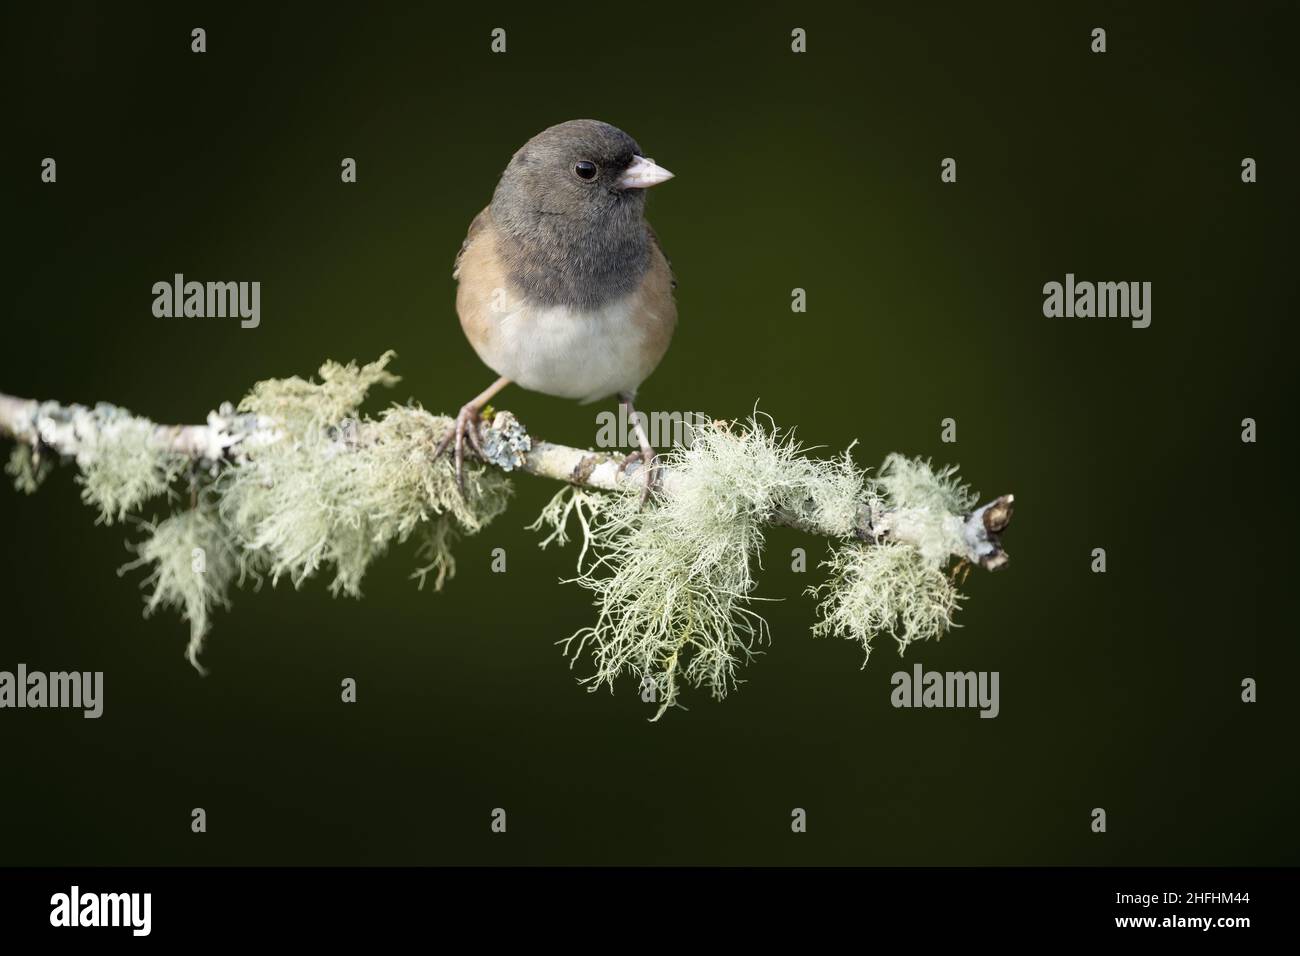 Female dark-eyed junco perched on lichen covered branch, Snohomish, Washington, USA Stock Photo